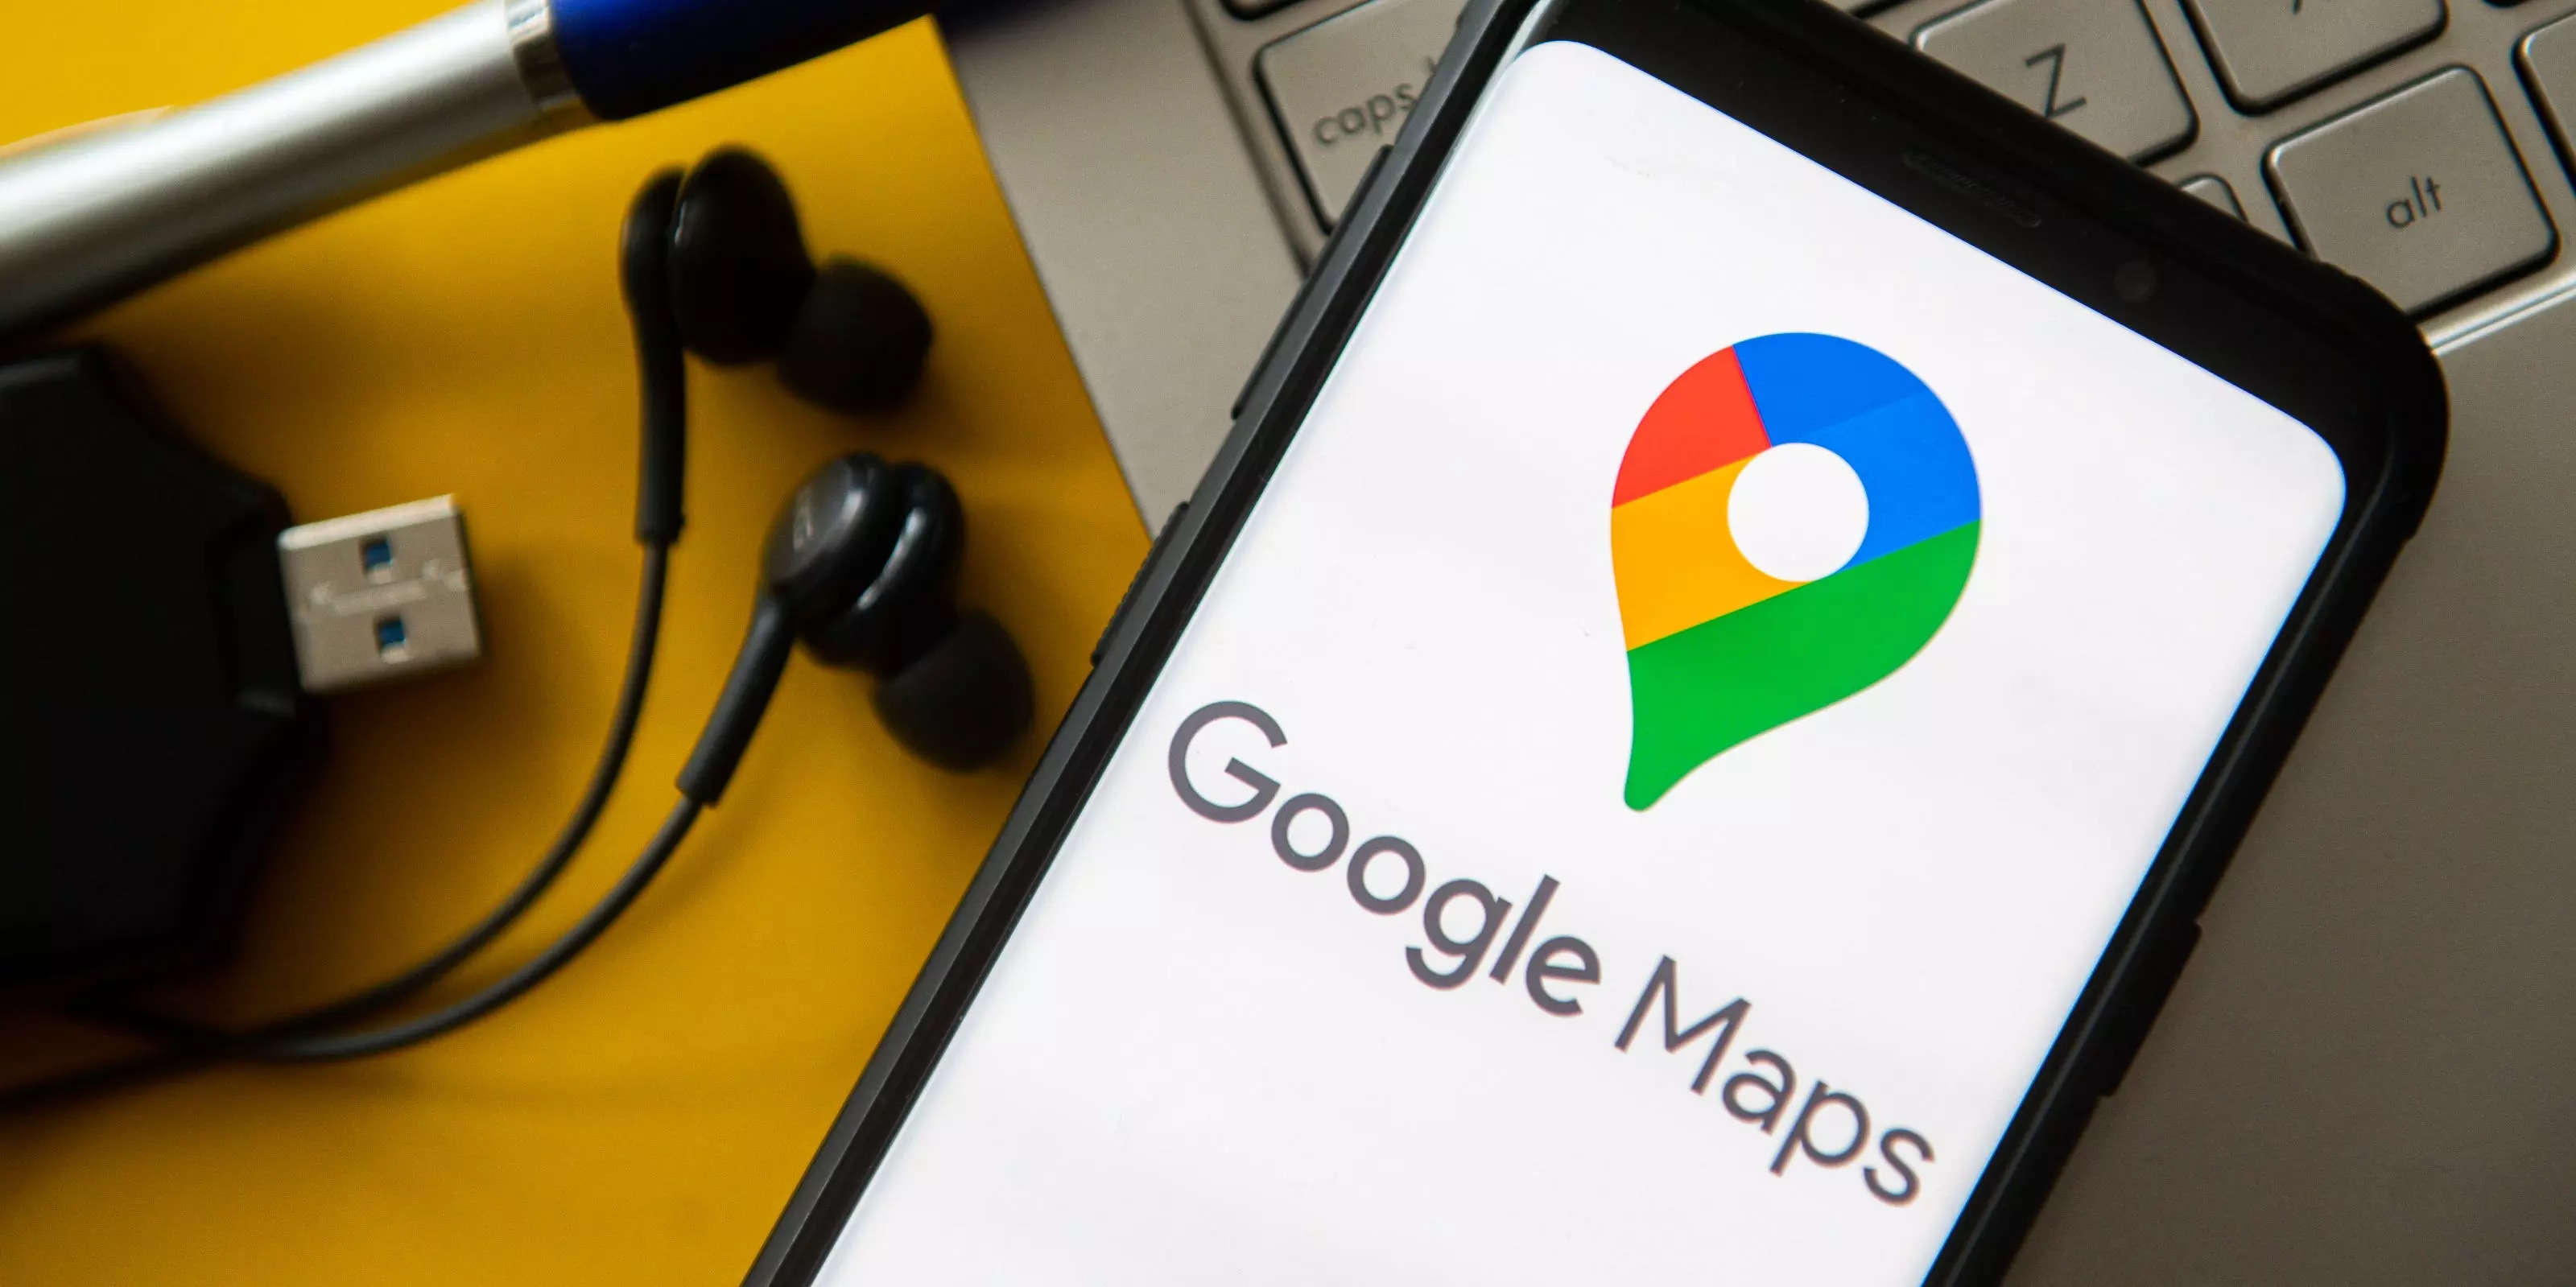 How to find your current location in Google Maps